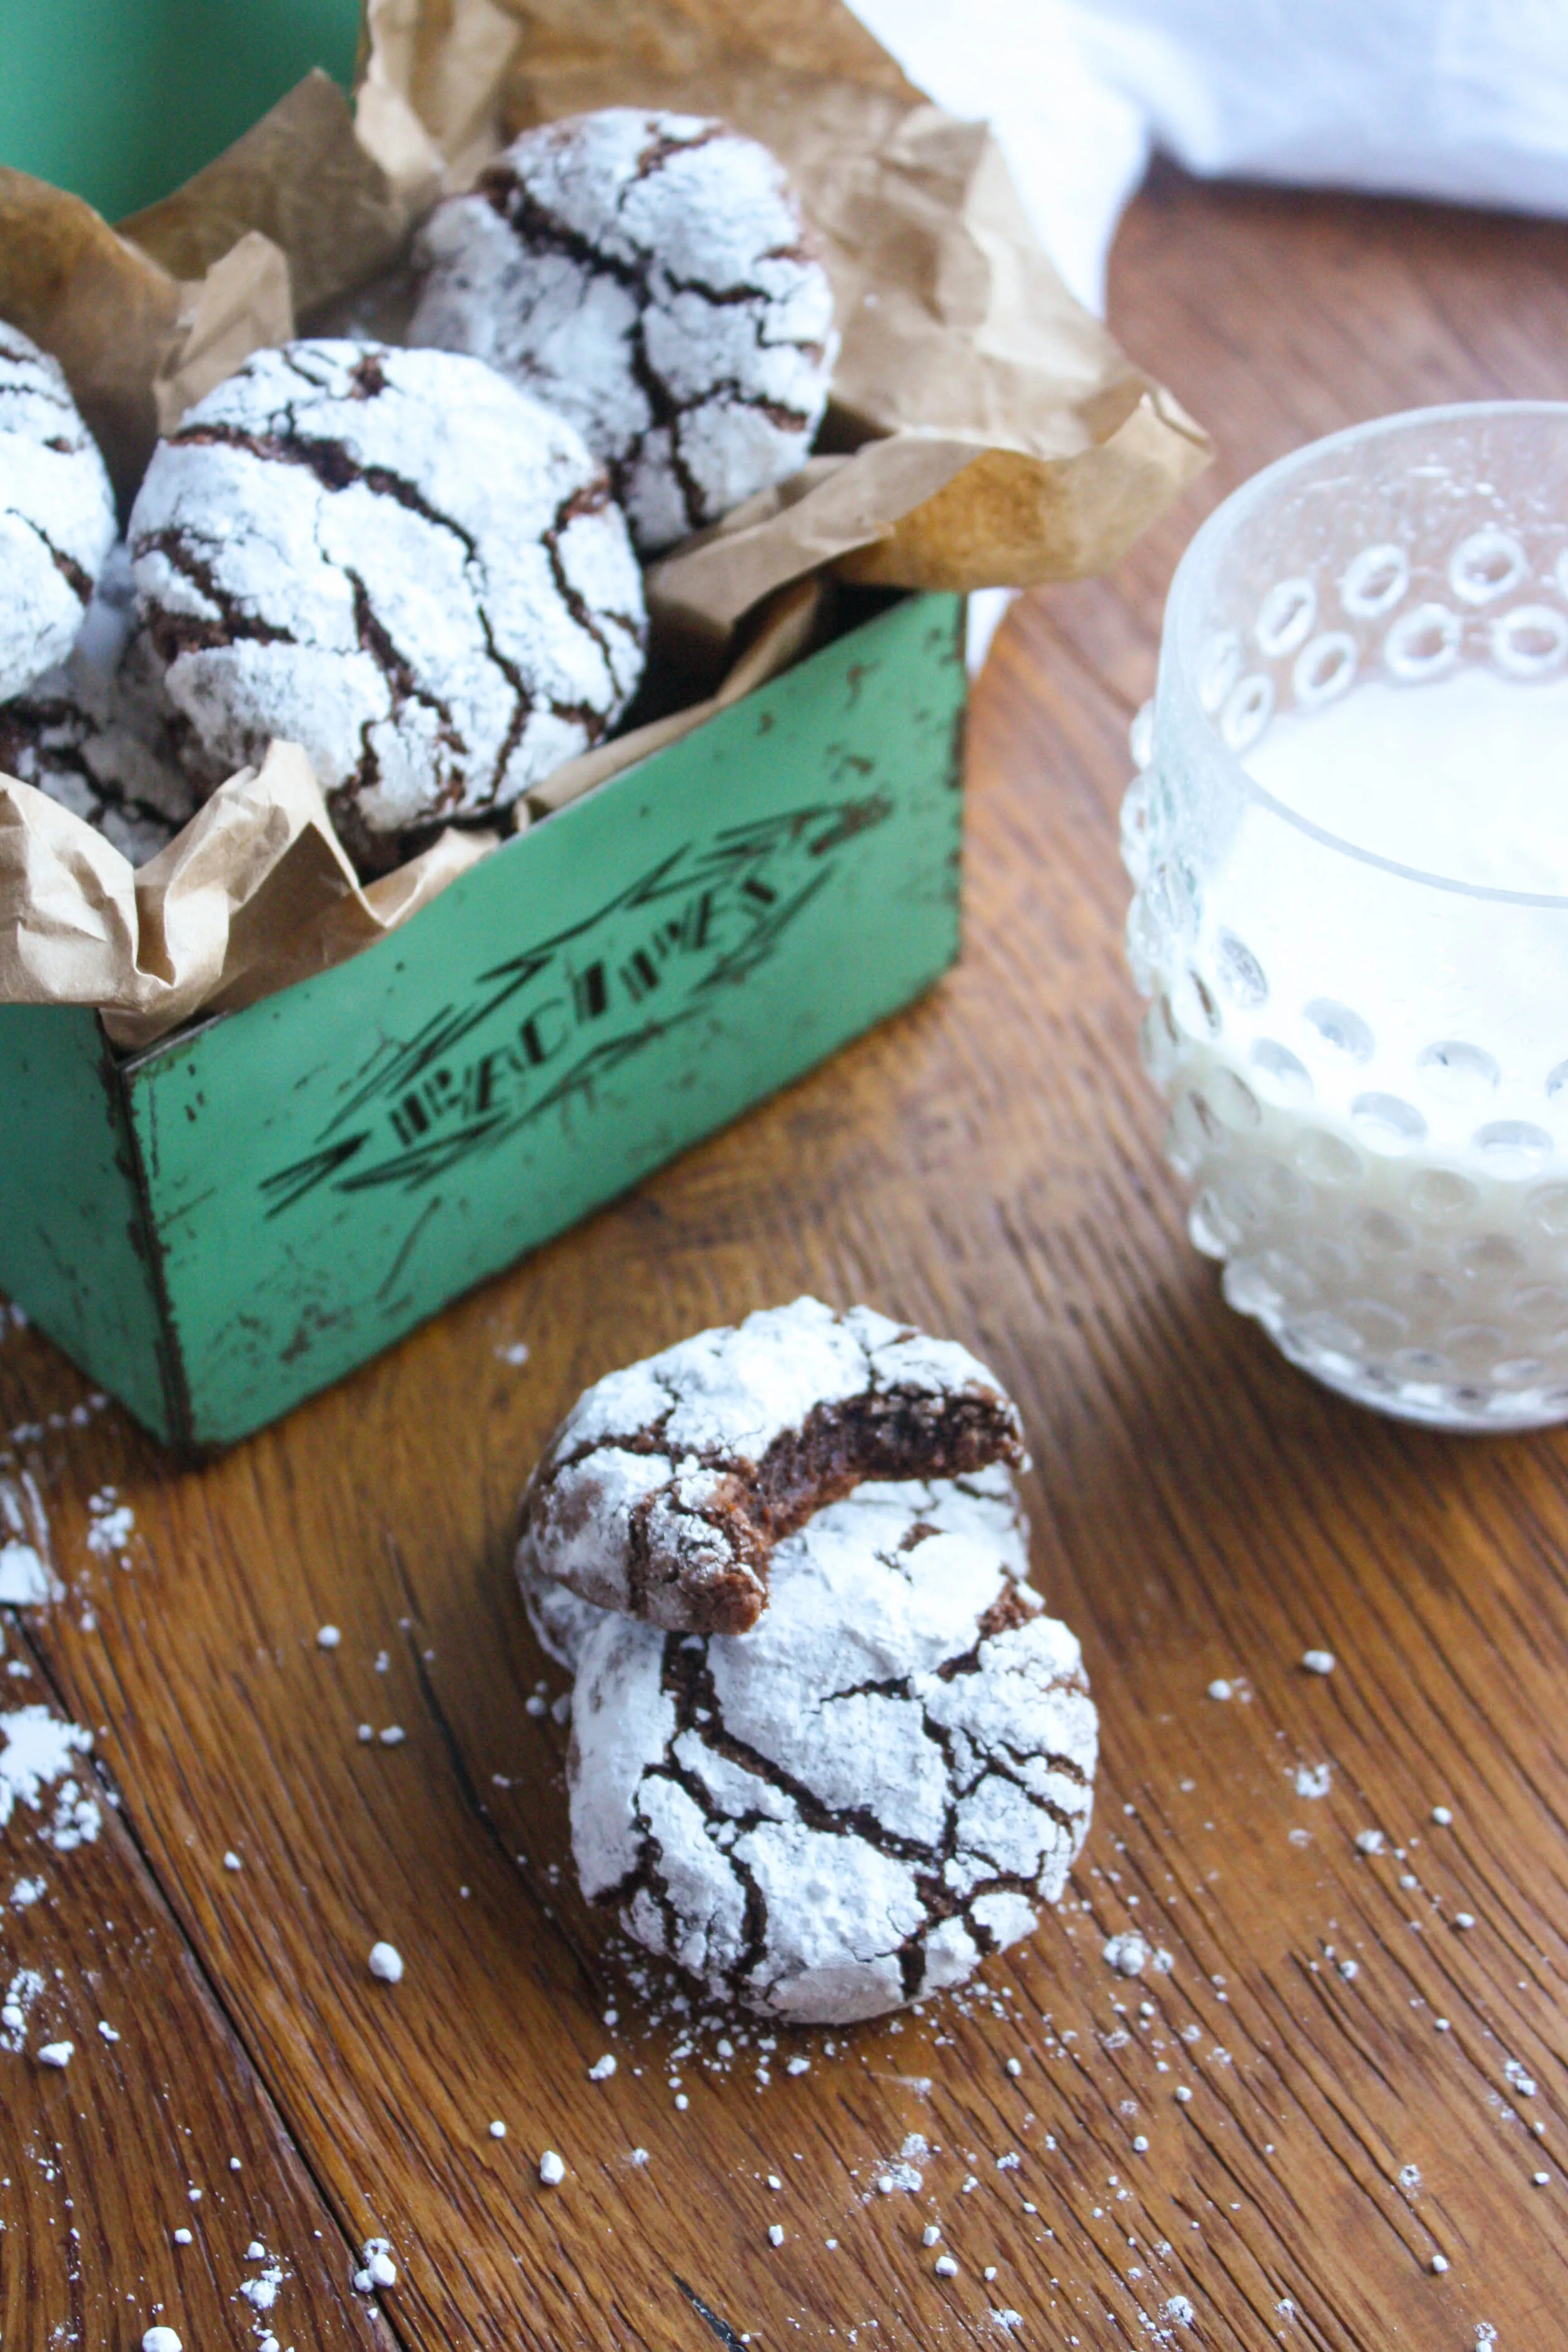 Chocolate-Chili Crinkle Cookies are the sort of cookies you'll want a few of! These cookies are pretty, and rich and chocolaty! 